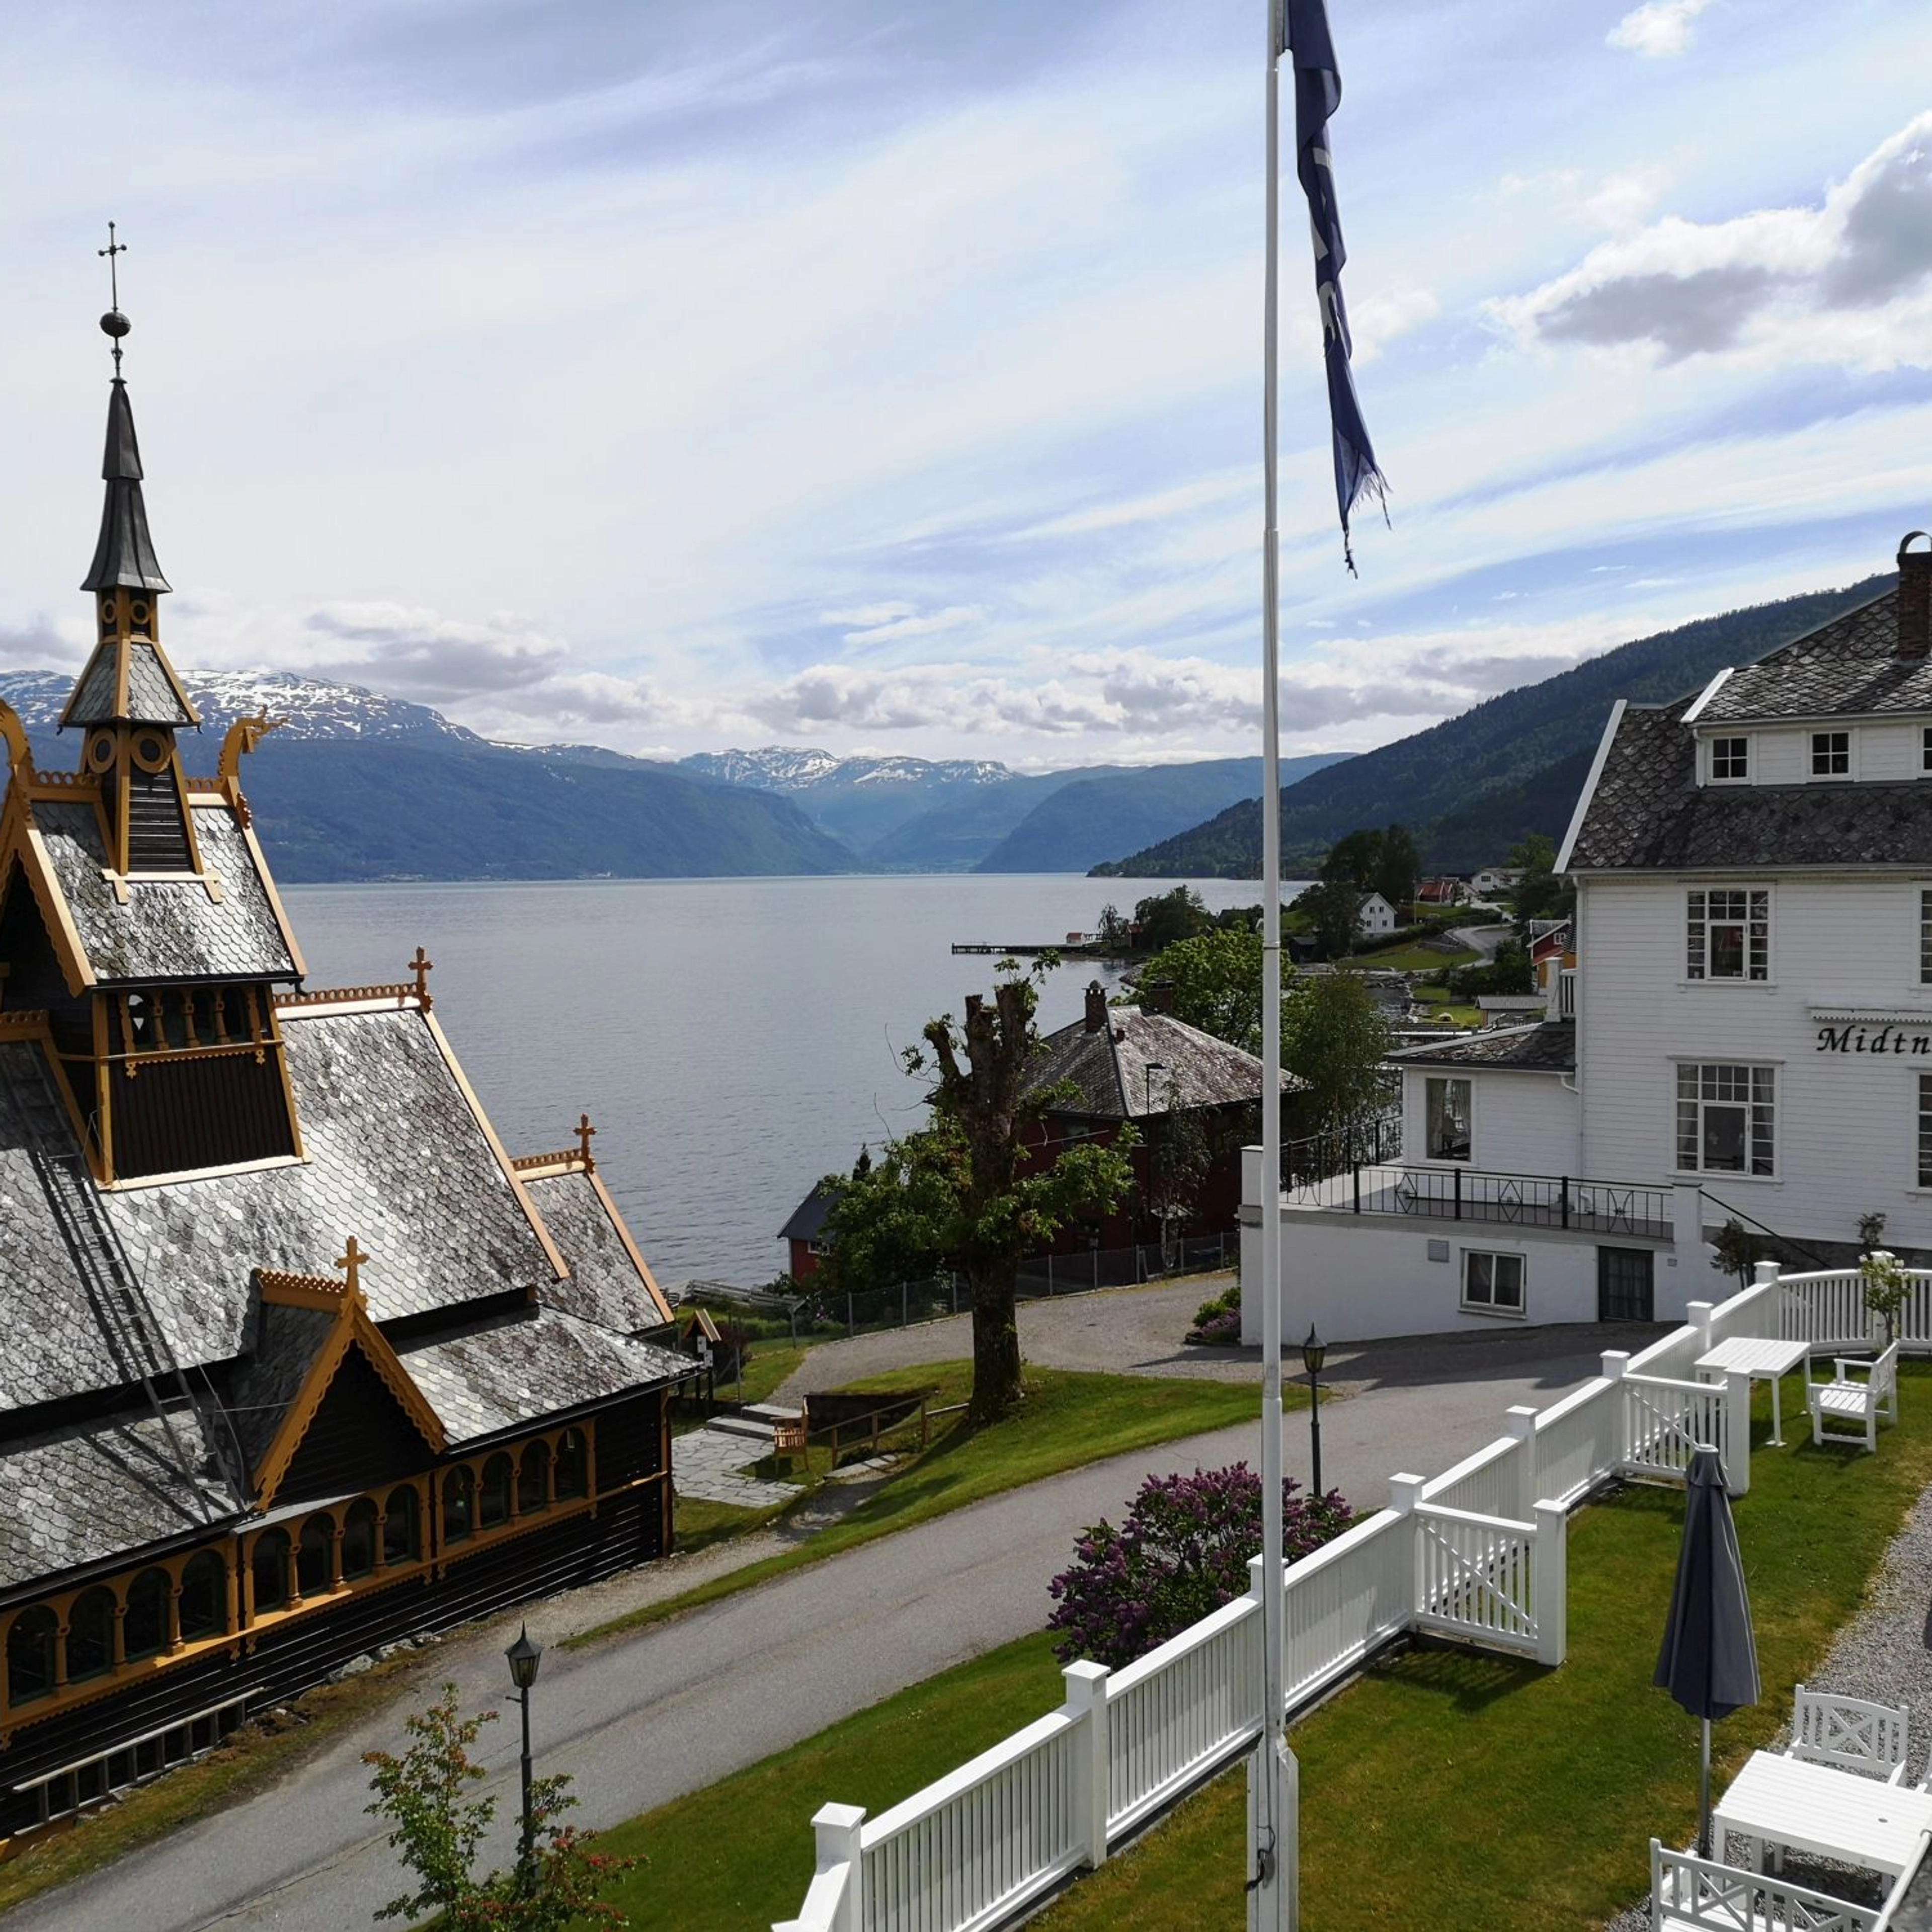 Places to stay in Balestrand - Midtnes Hotel - Balestrand, Norway